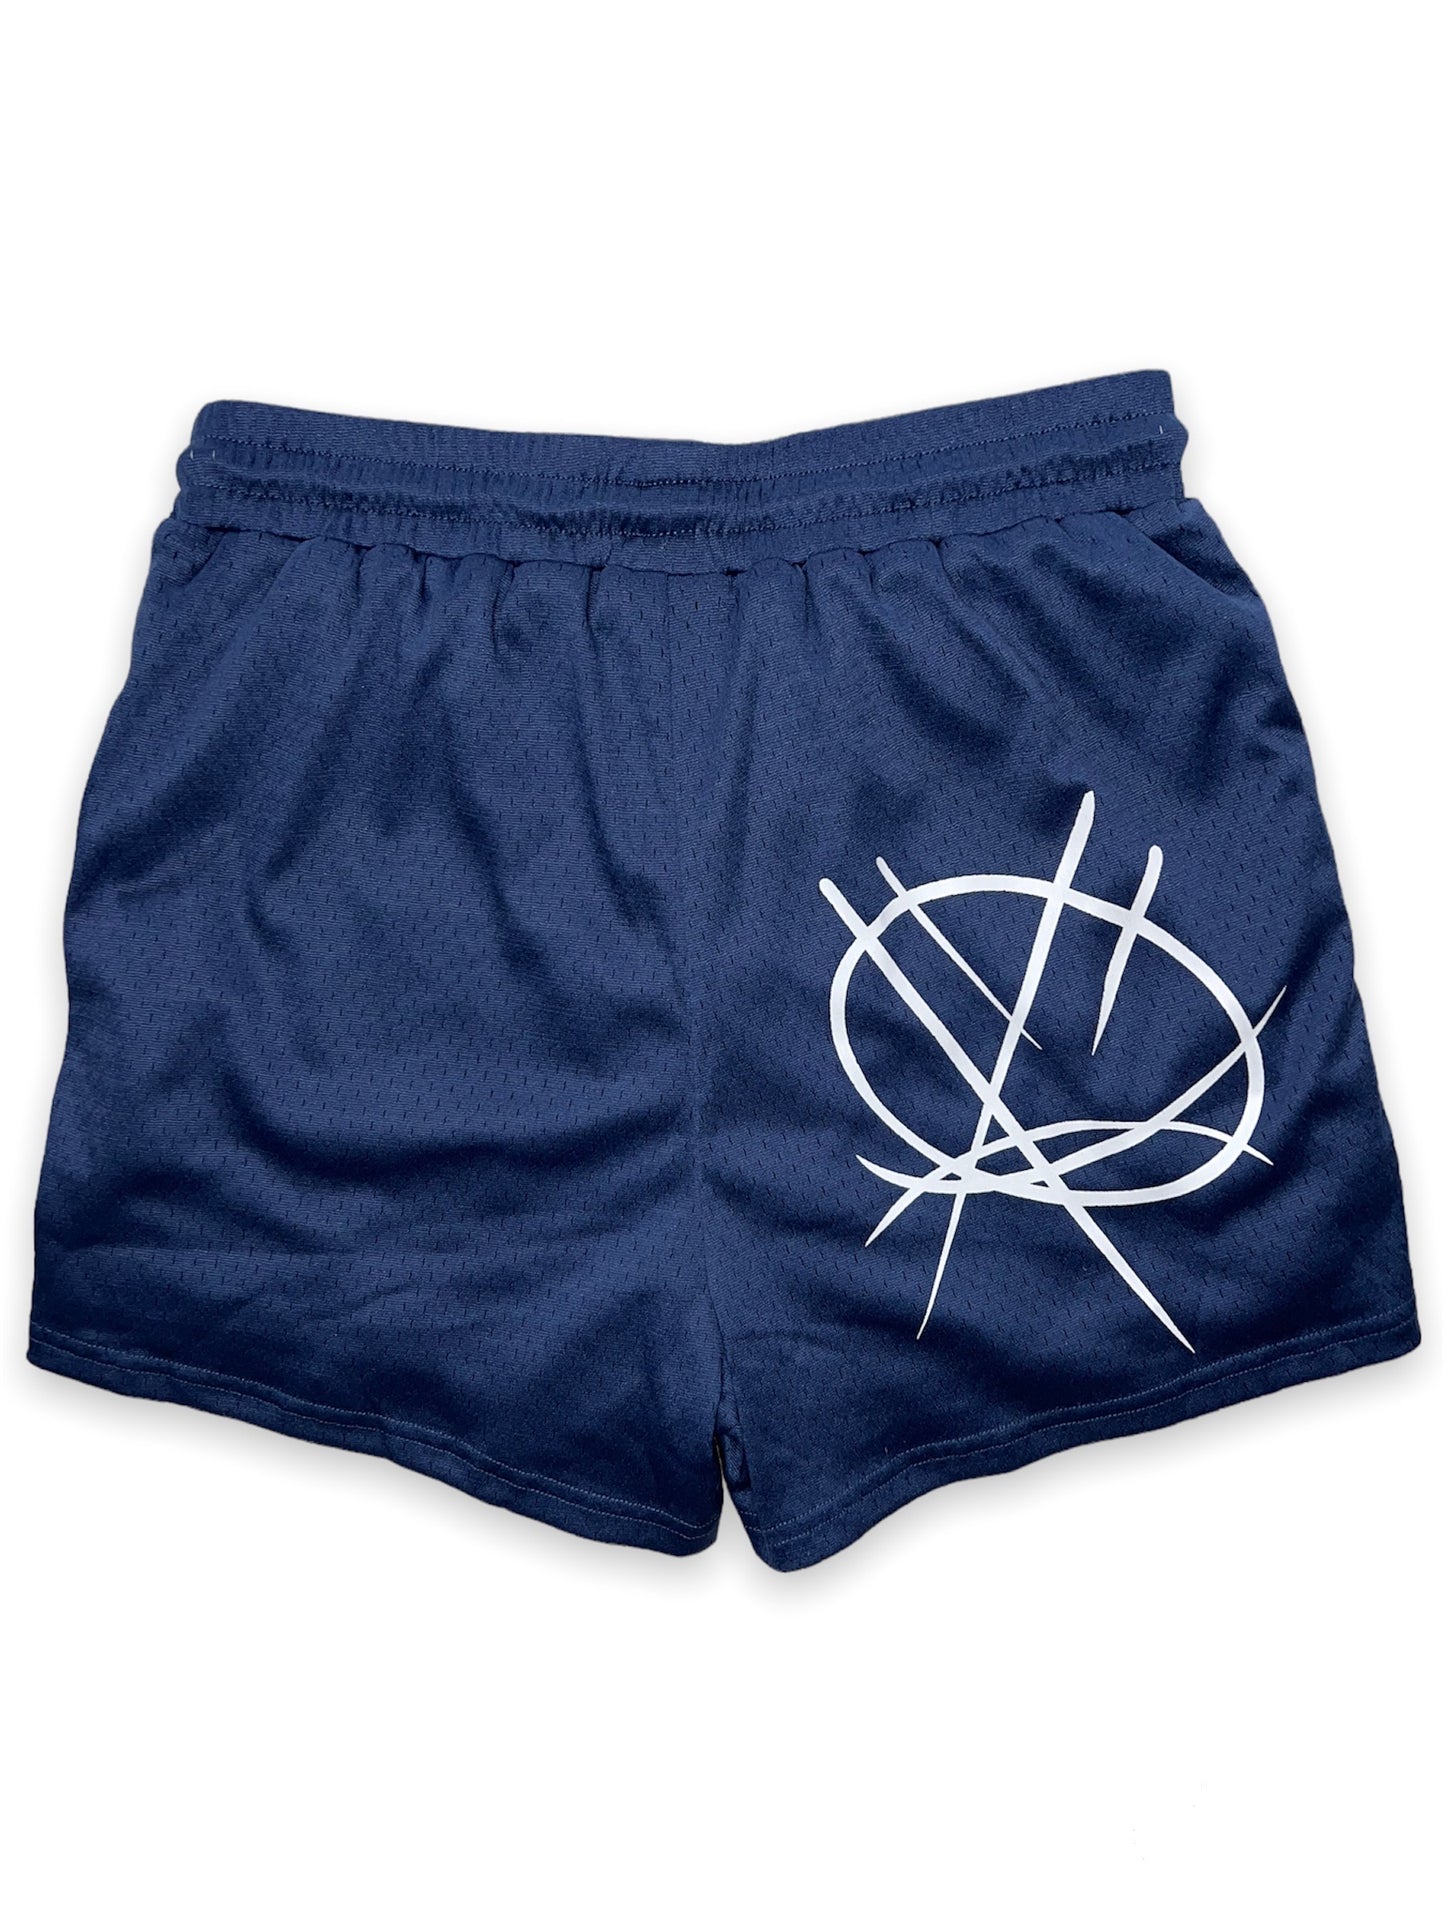 NAVY BLUE DISORDERED SHORTS